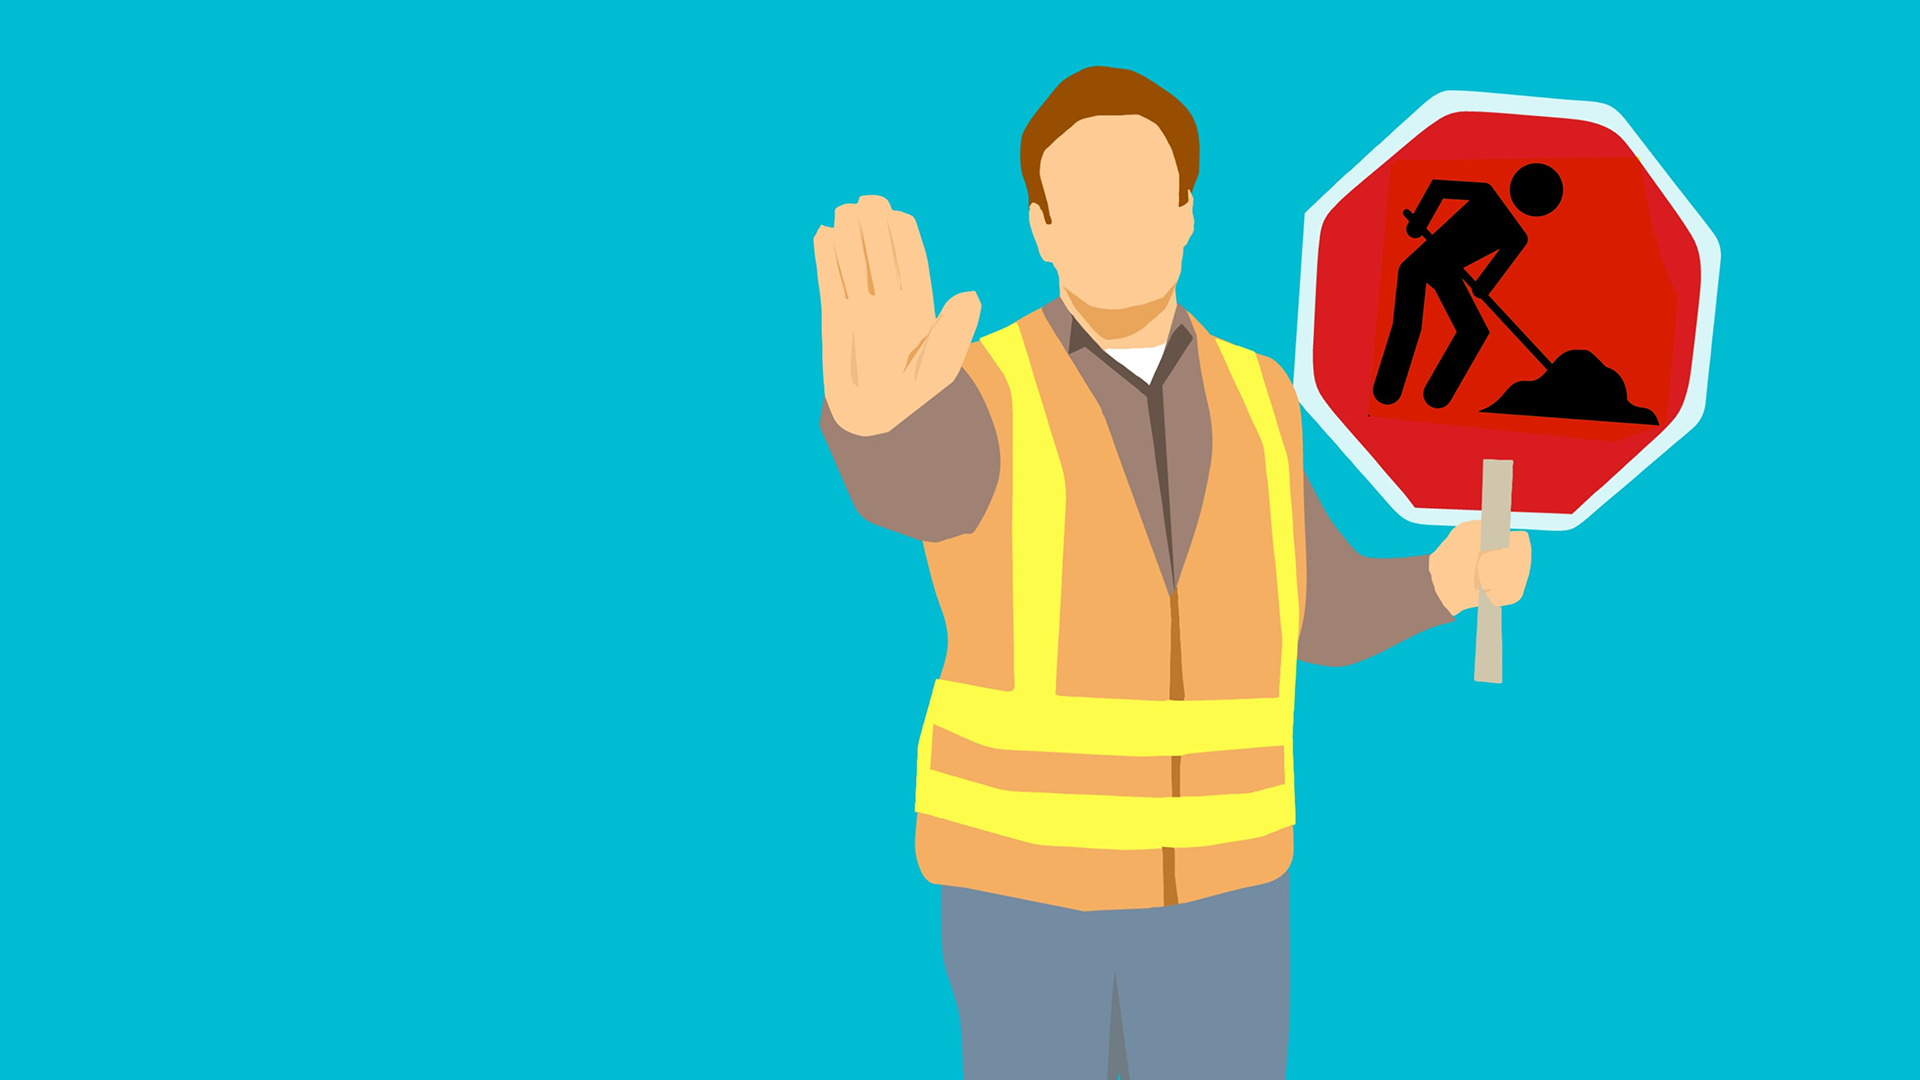 Construction Workzone Safety Flagger